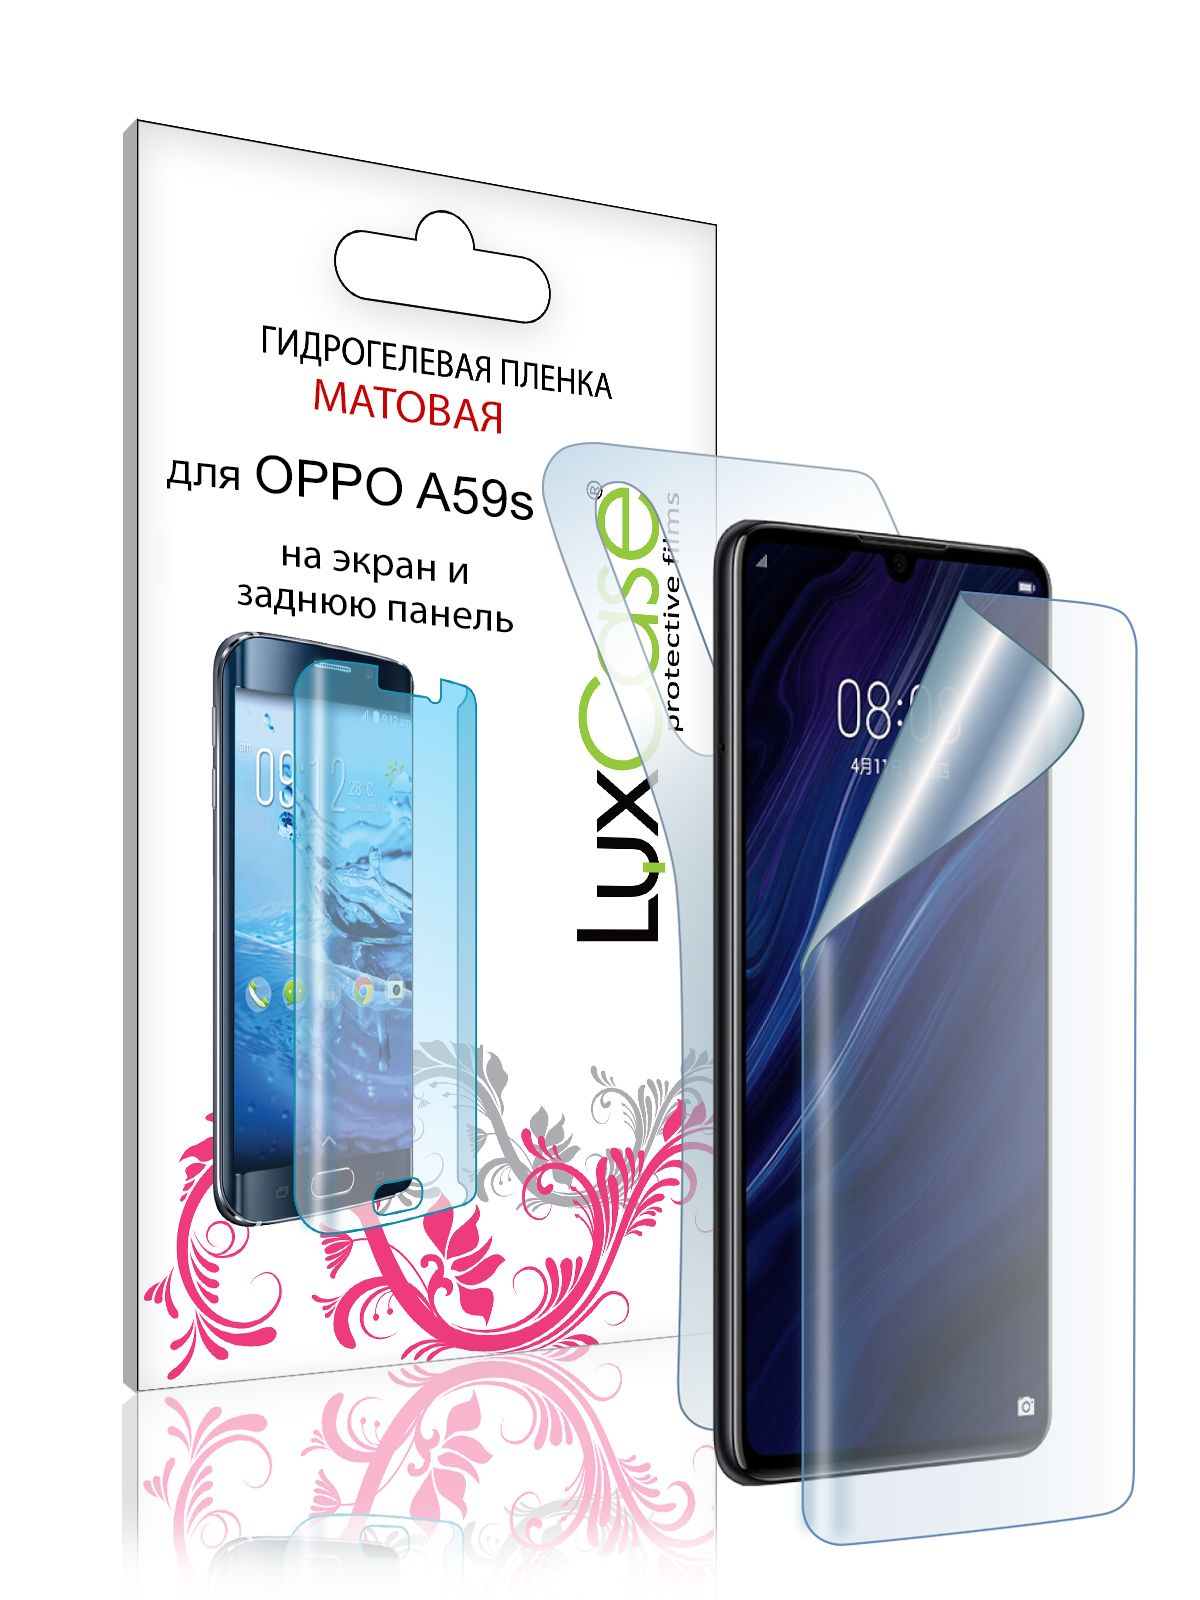 Гидрогелевая пленка LuxCase для Oppo A59s 0.14mm Matte Front and Back 87647 пленка защитная гидрогелевая krutoff для oppo a59s задняя сторона лофт кирпич